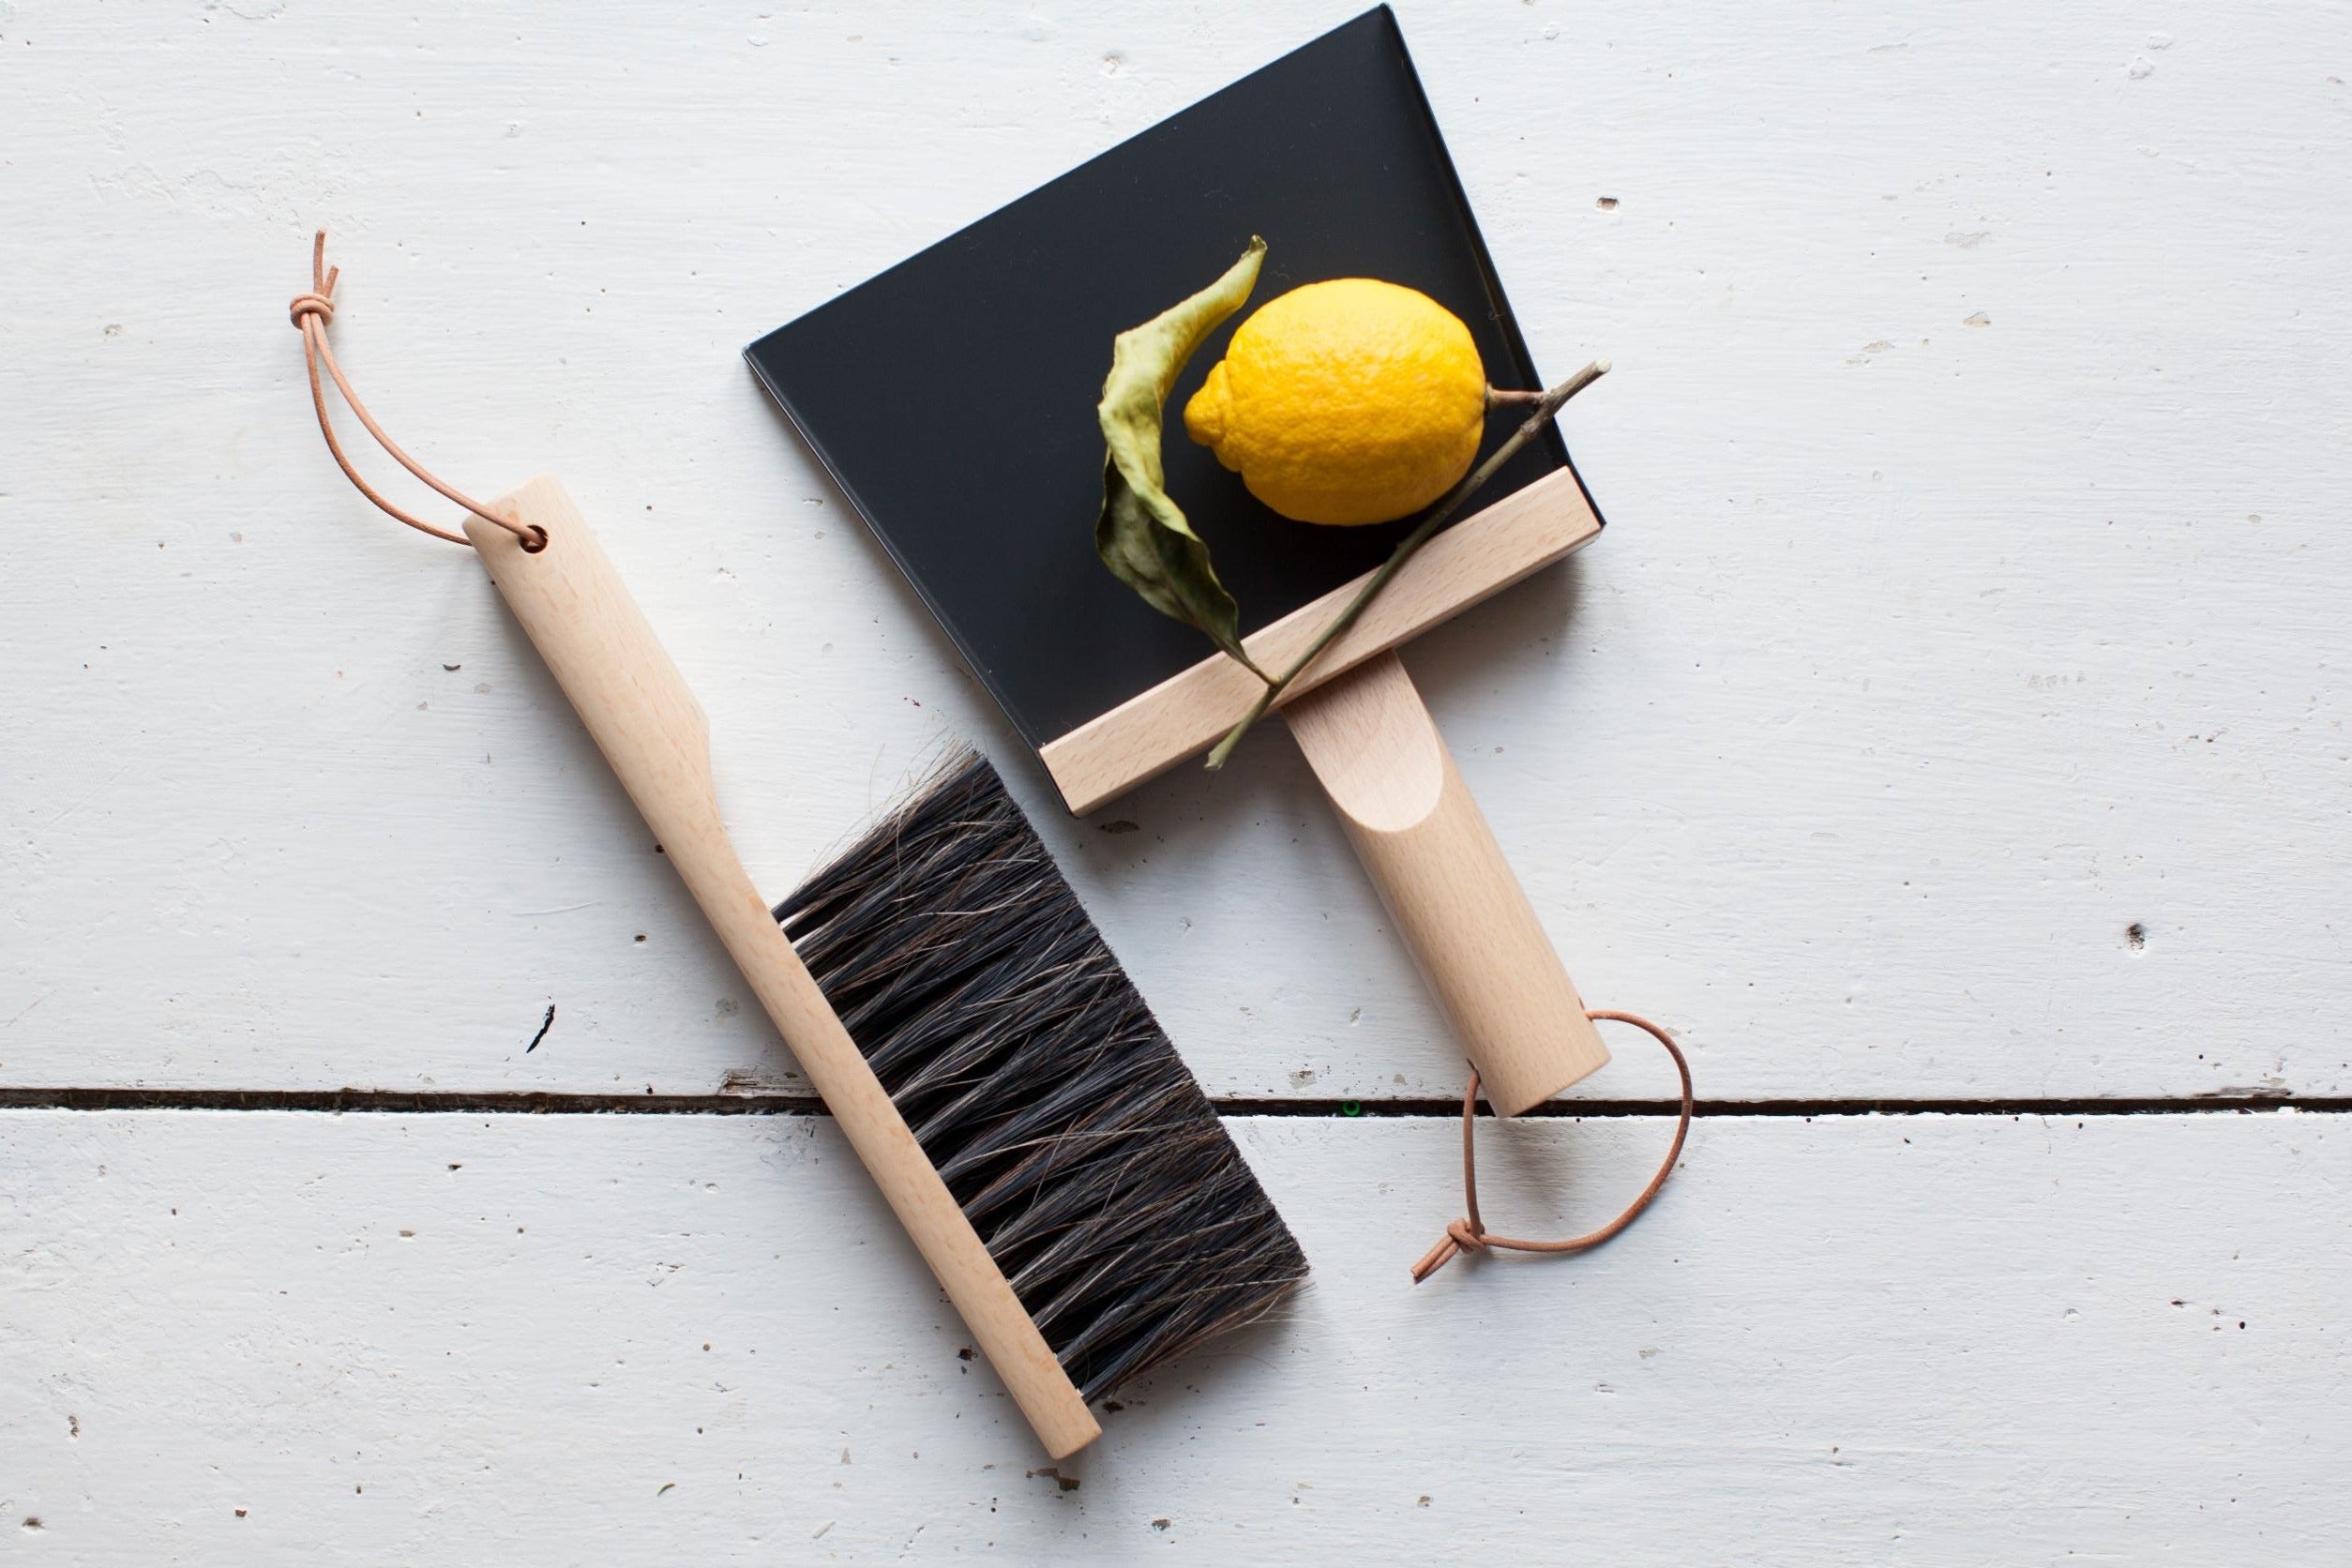 Andrée Jardin Mr. and Mrs. Clynk Dustpan & Brush "Coffret" Gift Set with Wall Hooks Utilities Andrée Jardin Brand_Andrée Jardin Home_Broom Sets Home_Household Cleaning New Arrivals CollectionDESIGNbyMr_MrsCLYNK_13_d969768c-dae0-4ad8-bec0-e148339532e6